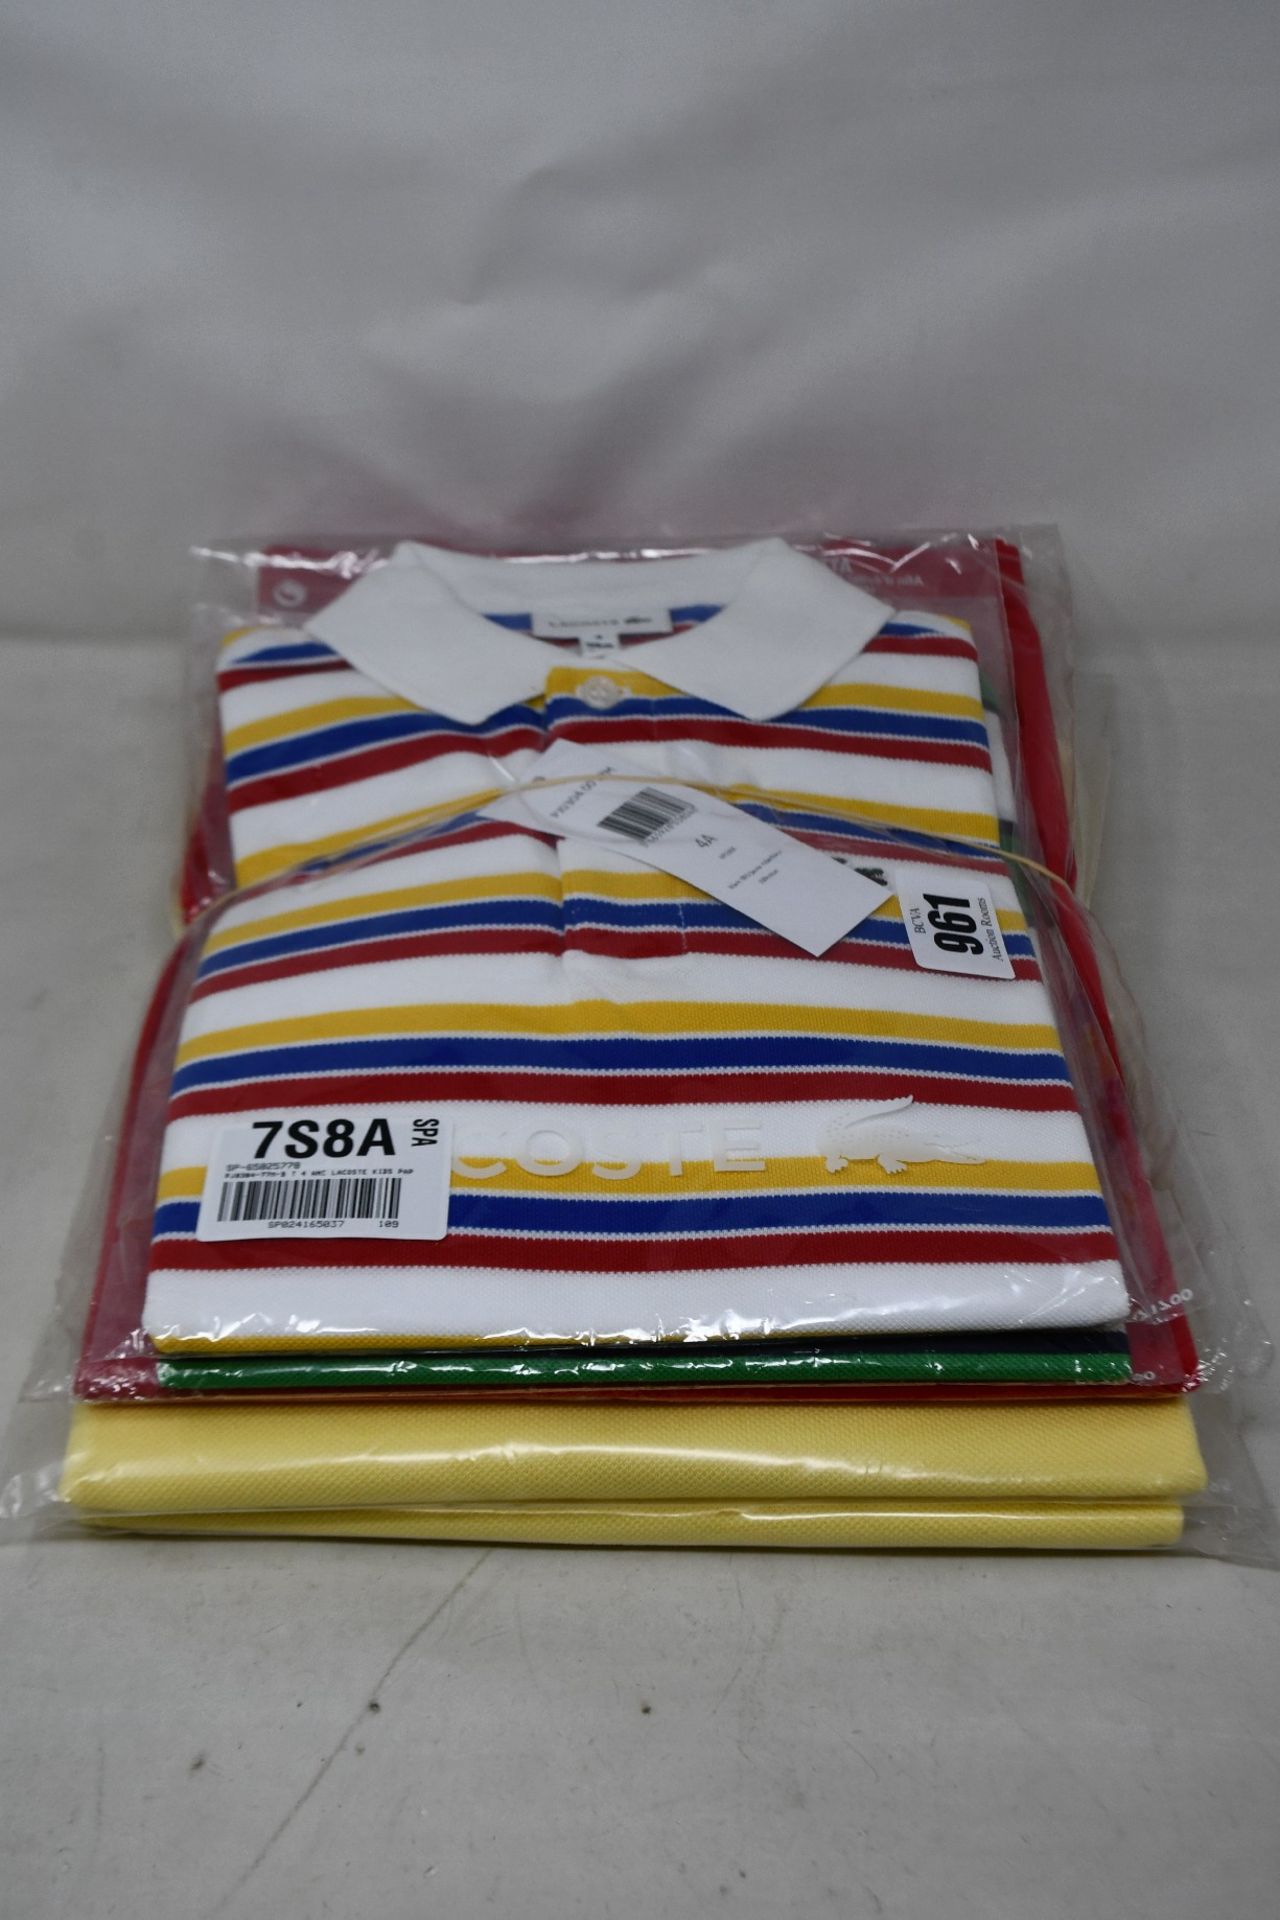 Two men's as new Lacoste polo shirts in yellow (FR 5/US L) and three children's Lacoste polo